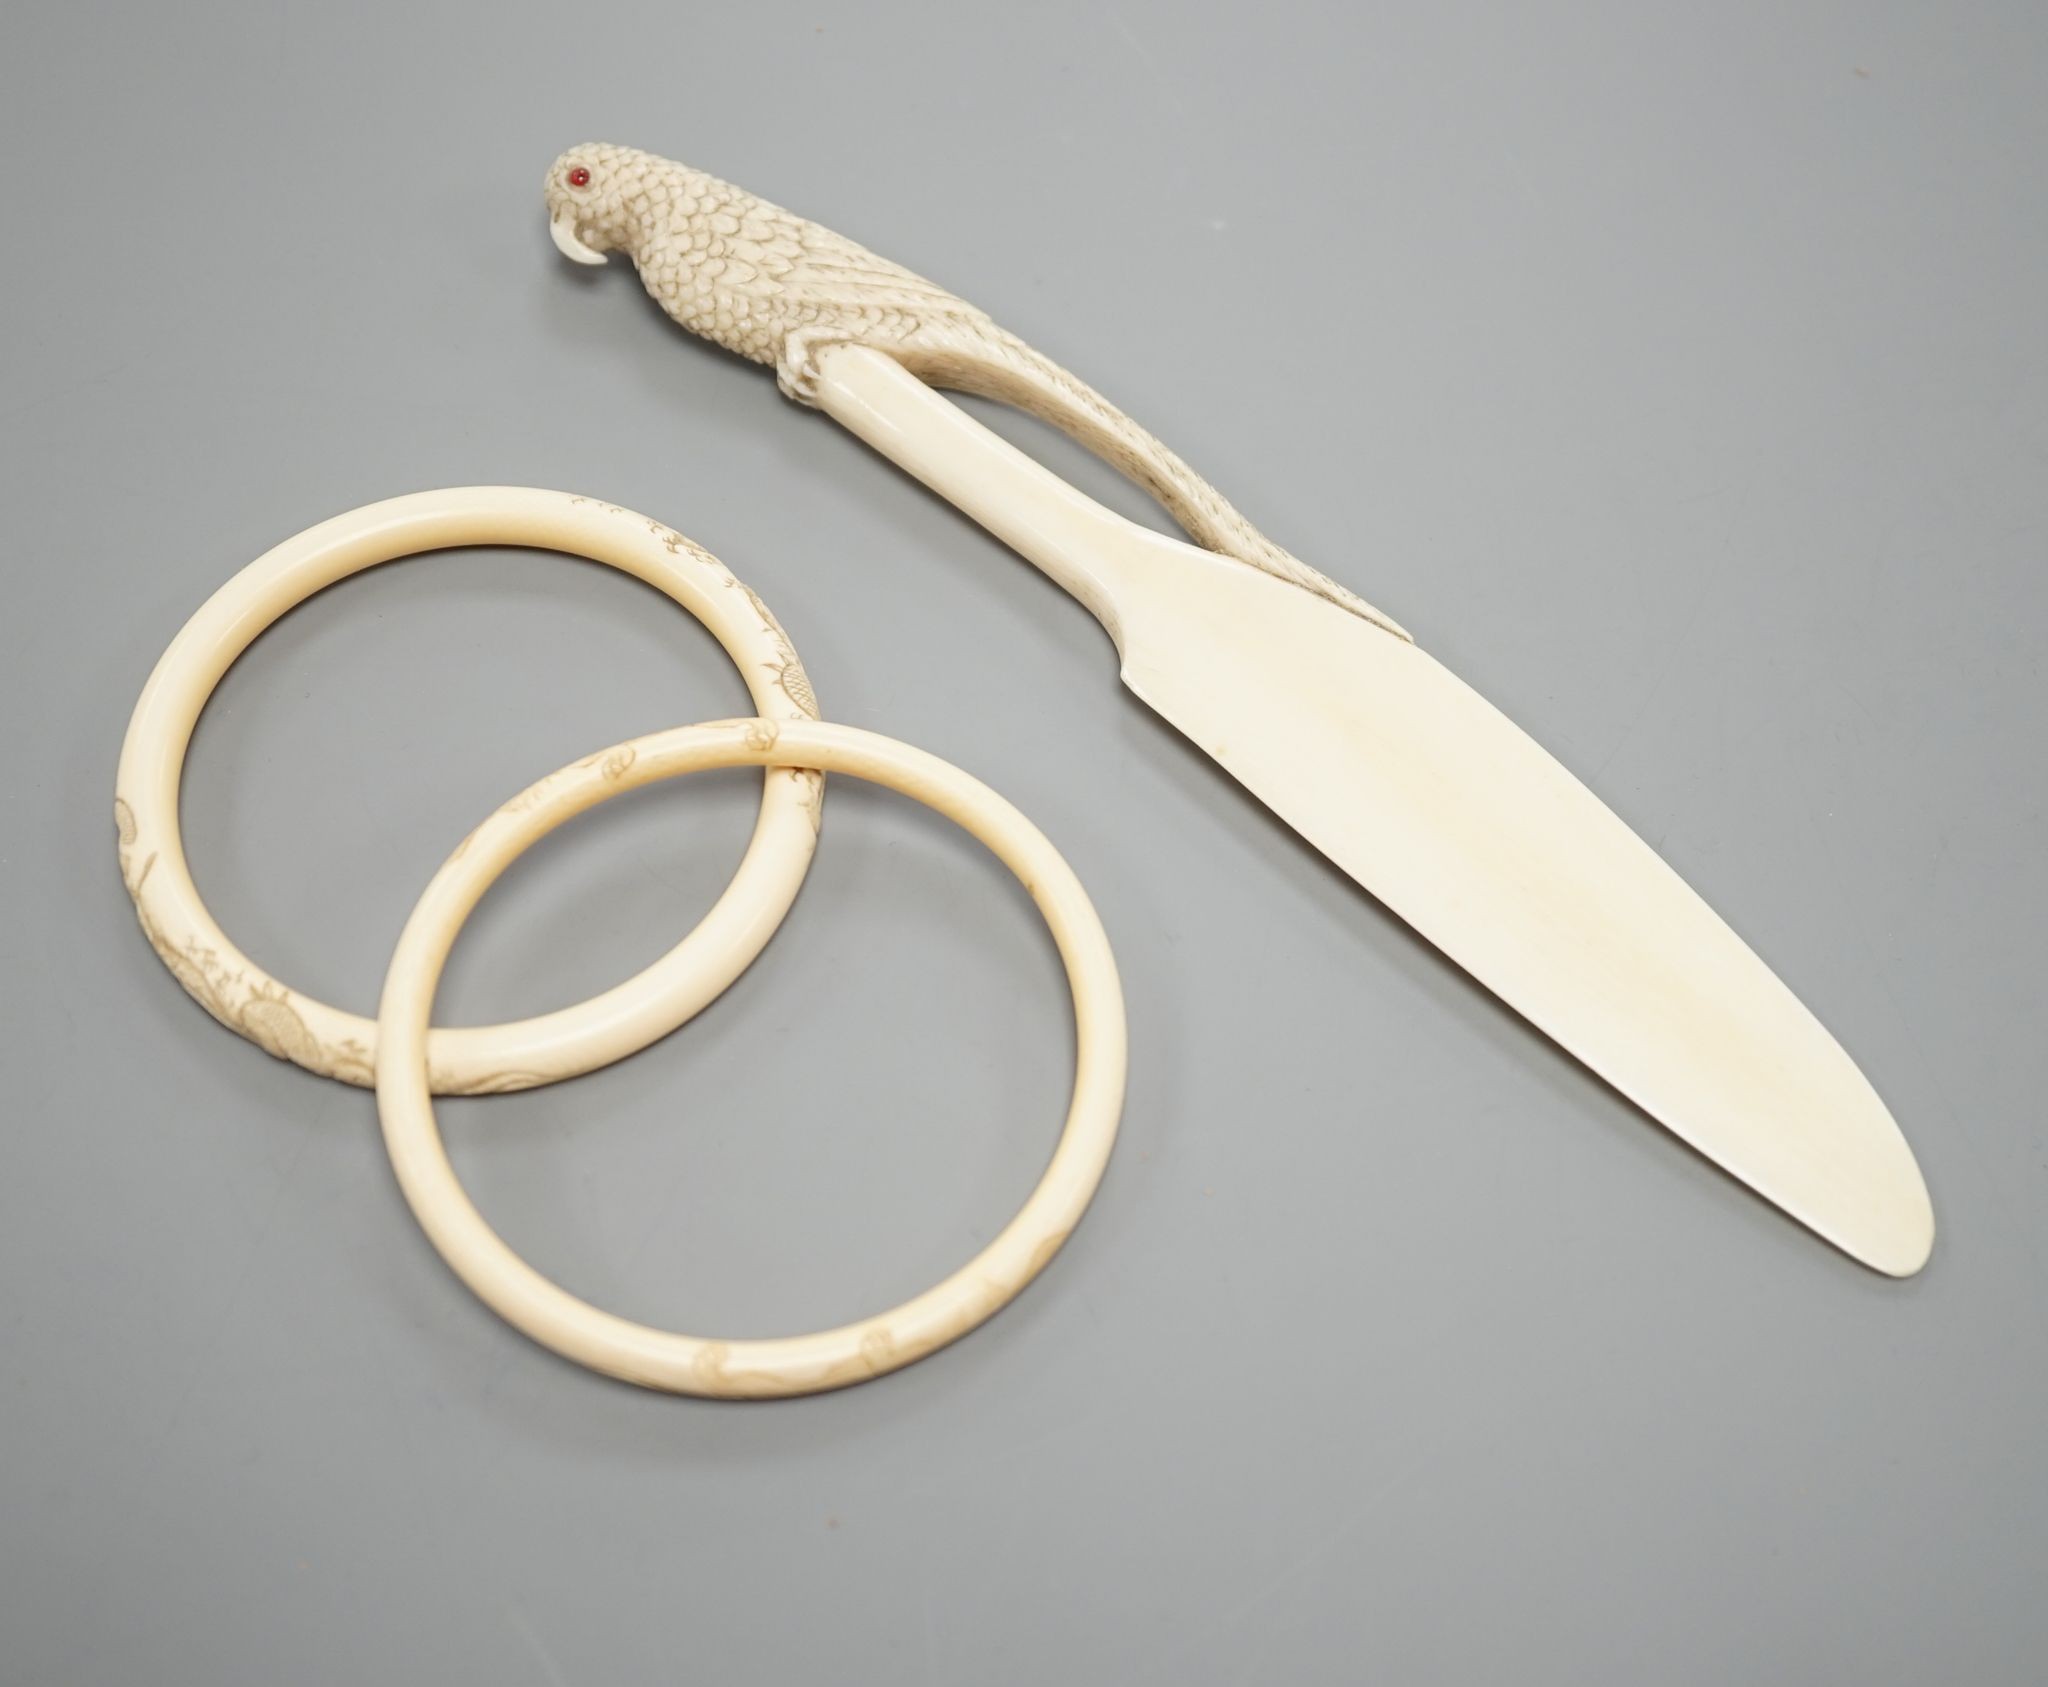 A late 19th century carved ivory ‘parrot’ paper knife and two Japanese carved Ivory bangles, paper knife 22 cms long.